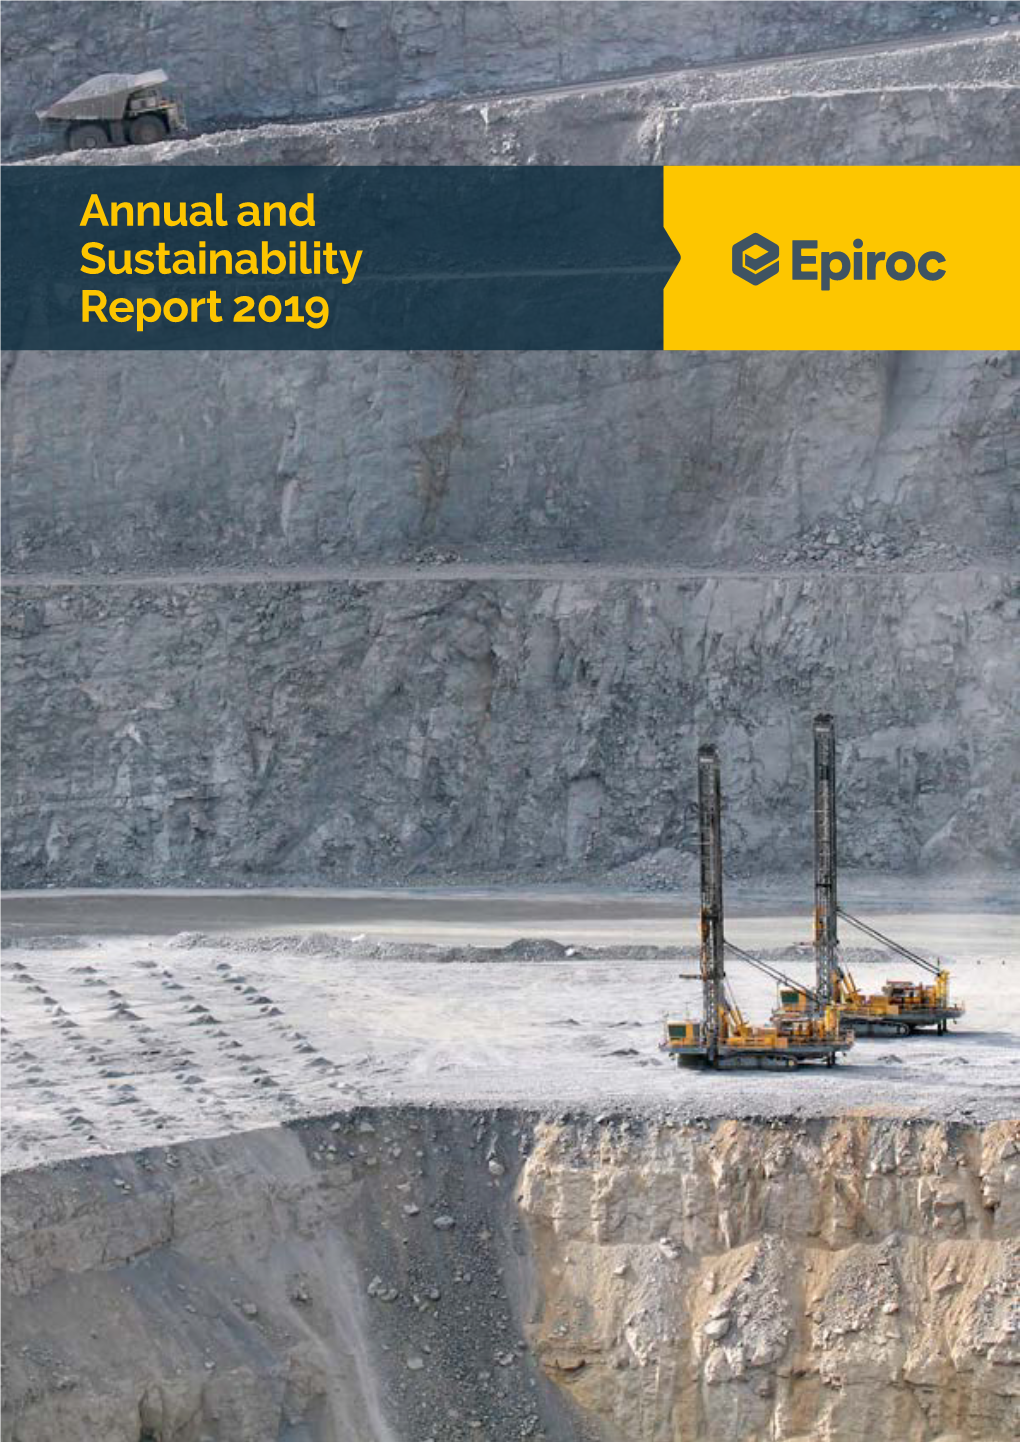 20200312 Epiroc Annual and Sustainability Report 2019